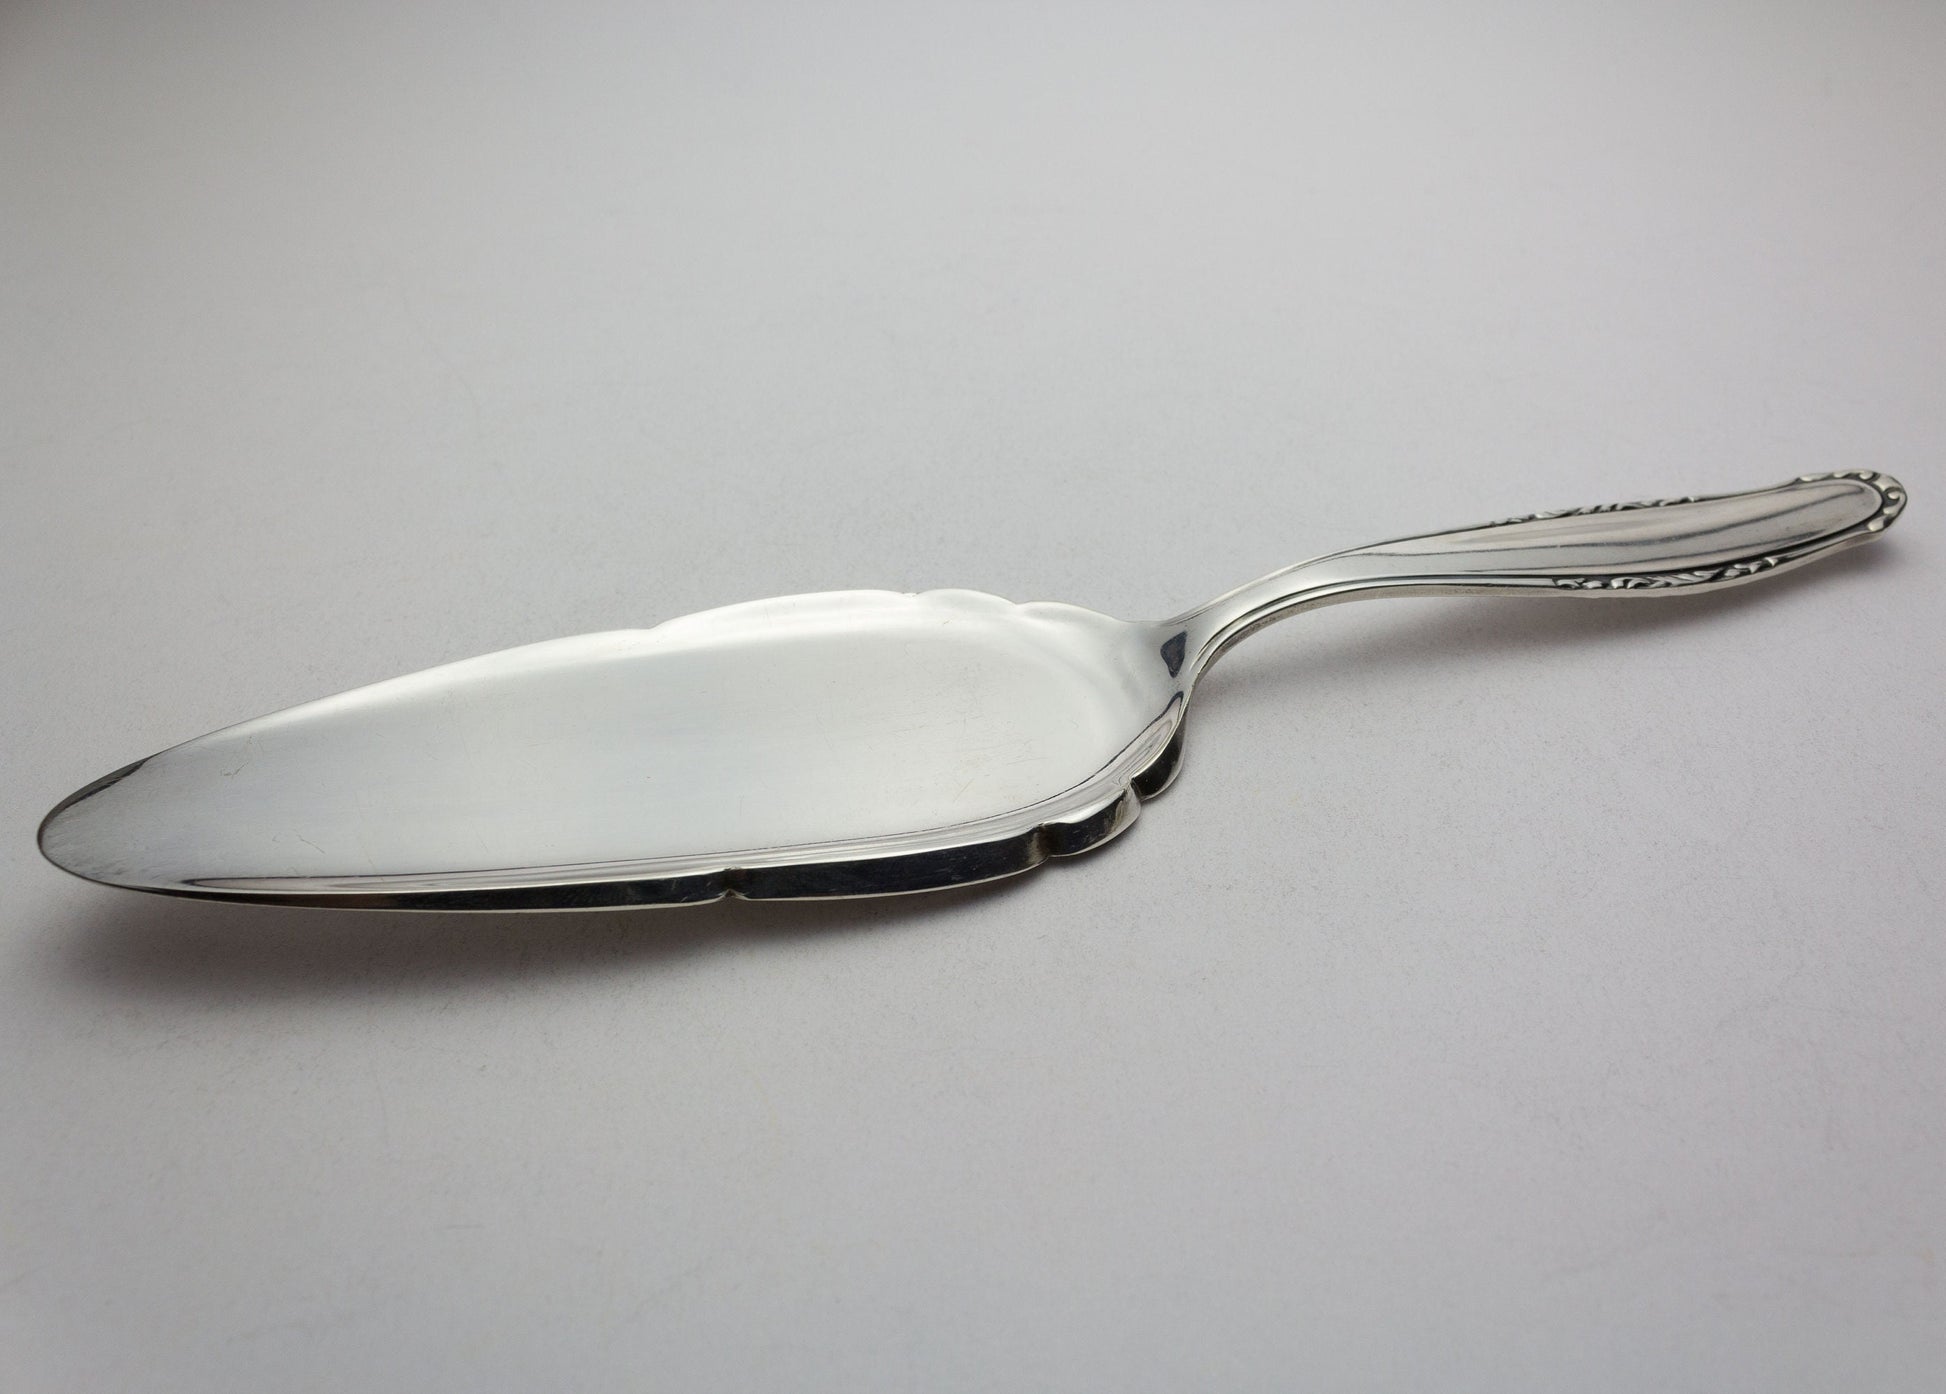 Small cake lifter, silver plated, pastry lift, vintage, cutlery 